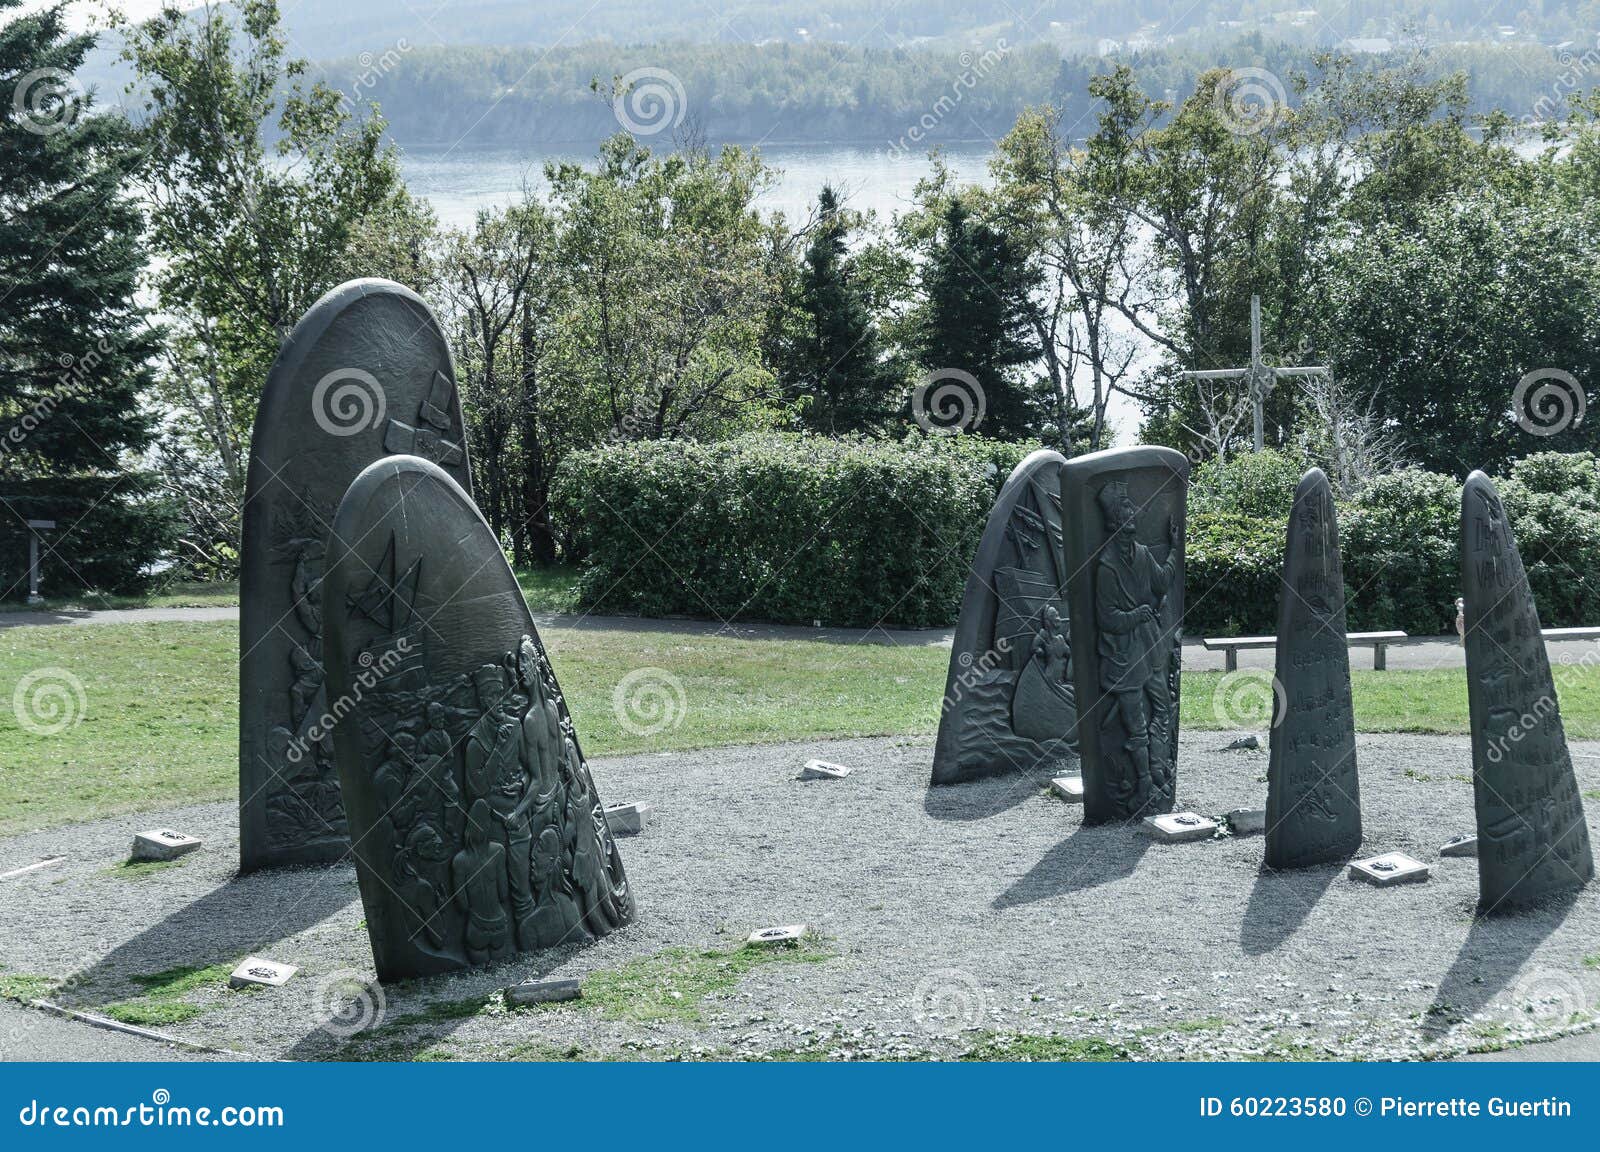 historic cast iron sculptures of gaspe